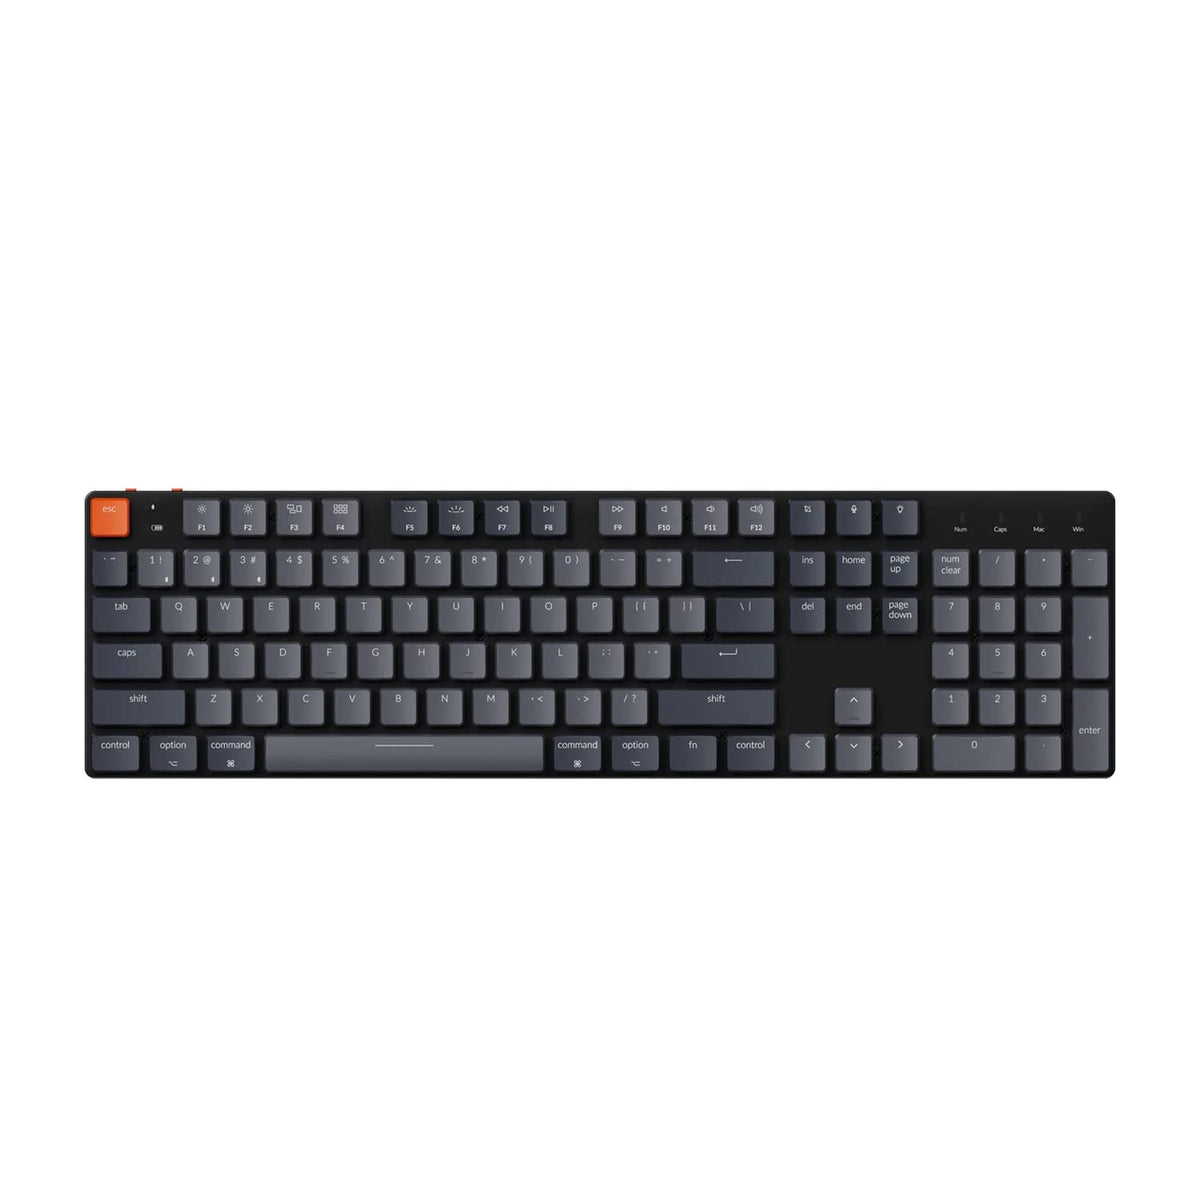 Keychron K5 SE Hot-swappable Wireless Mechanical Keyboard, Ultra-Slim Full Size 104 Keys White Backlight Bluetooth/Wired Aluminum Gaming Keyboard for Mac Windows, Low Profile Gateron Brown Switch